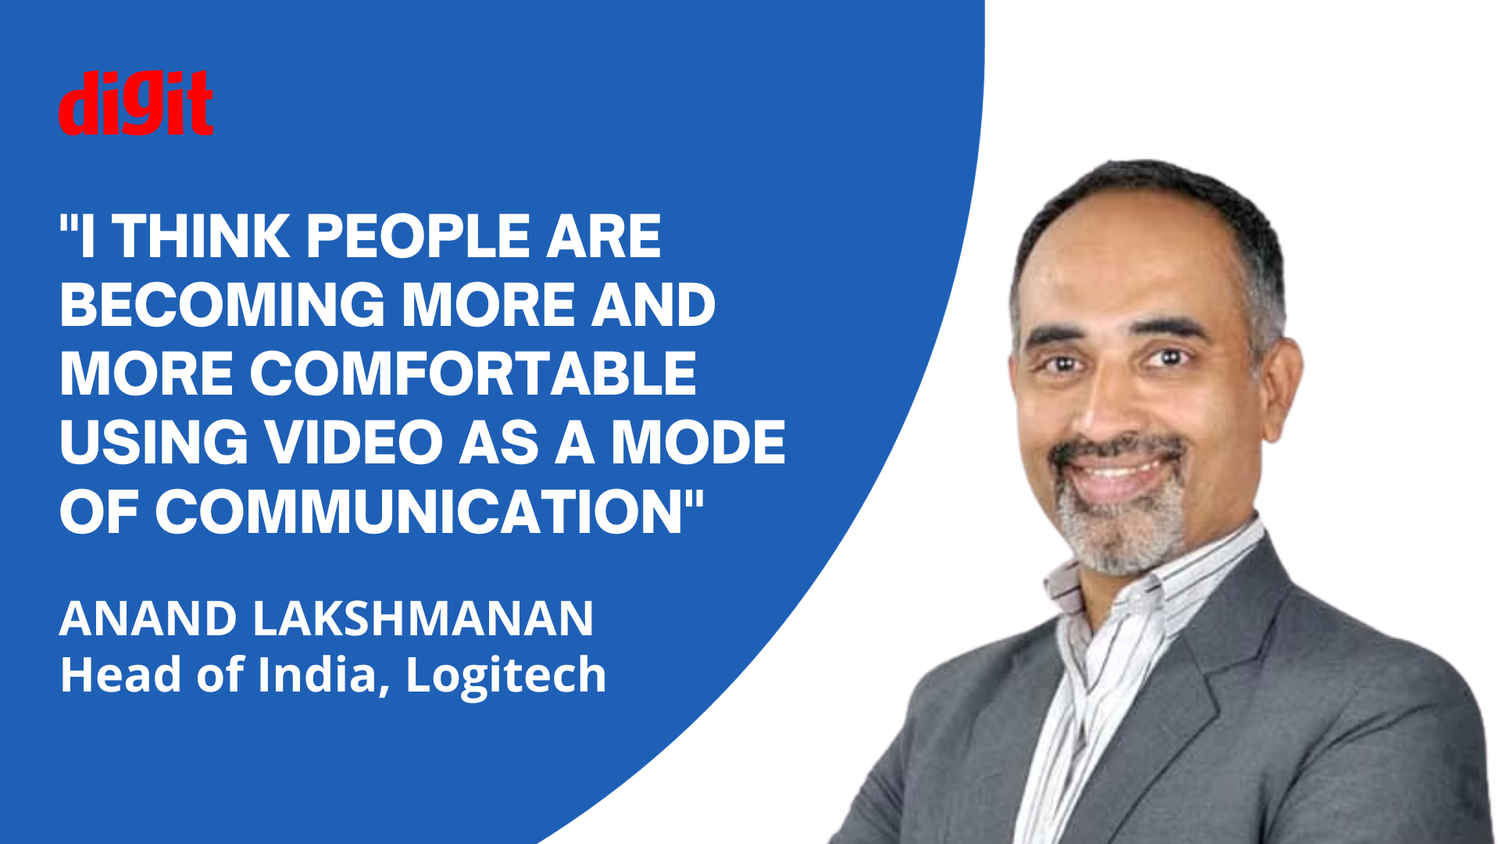 Logitech India’s Anand Lakshmanan on the brand’s product development, India’s potential in the tech world, and more!